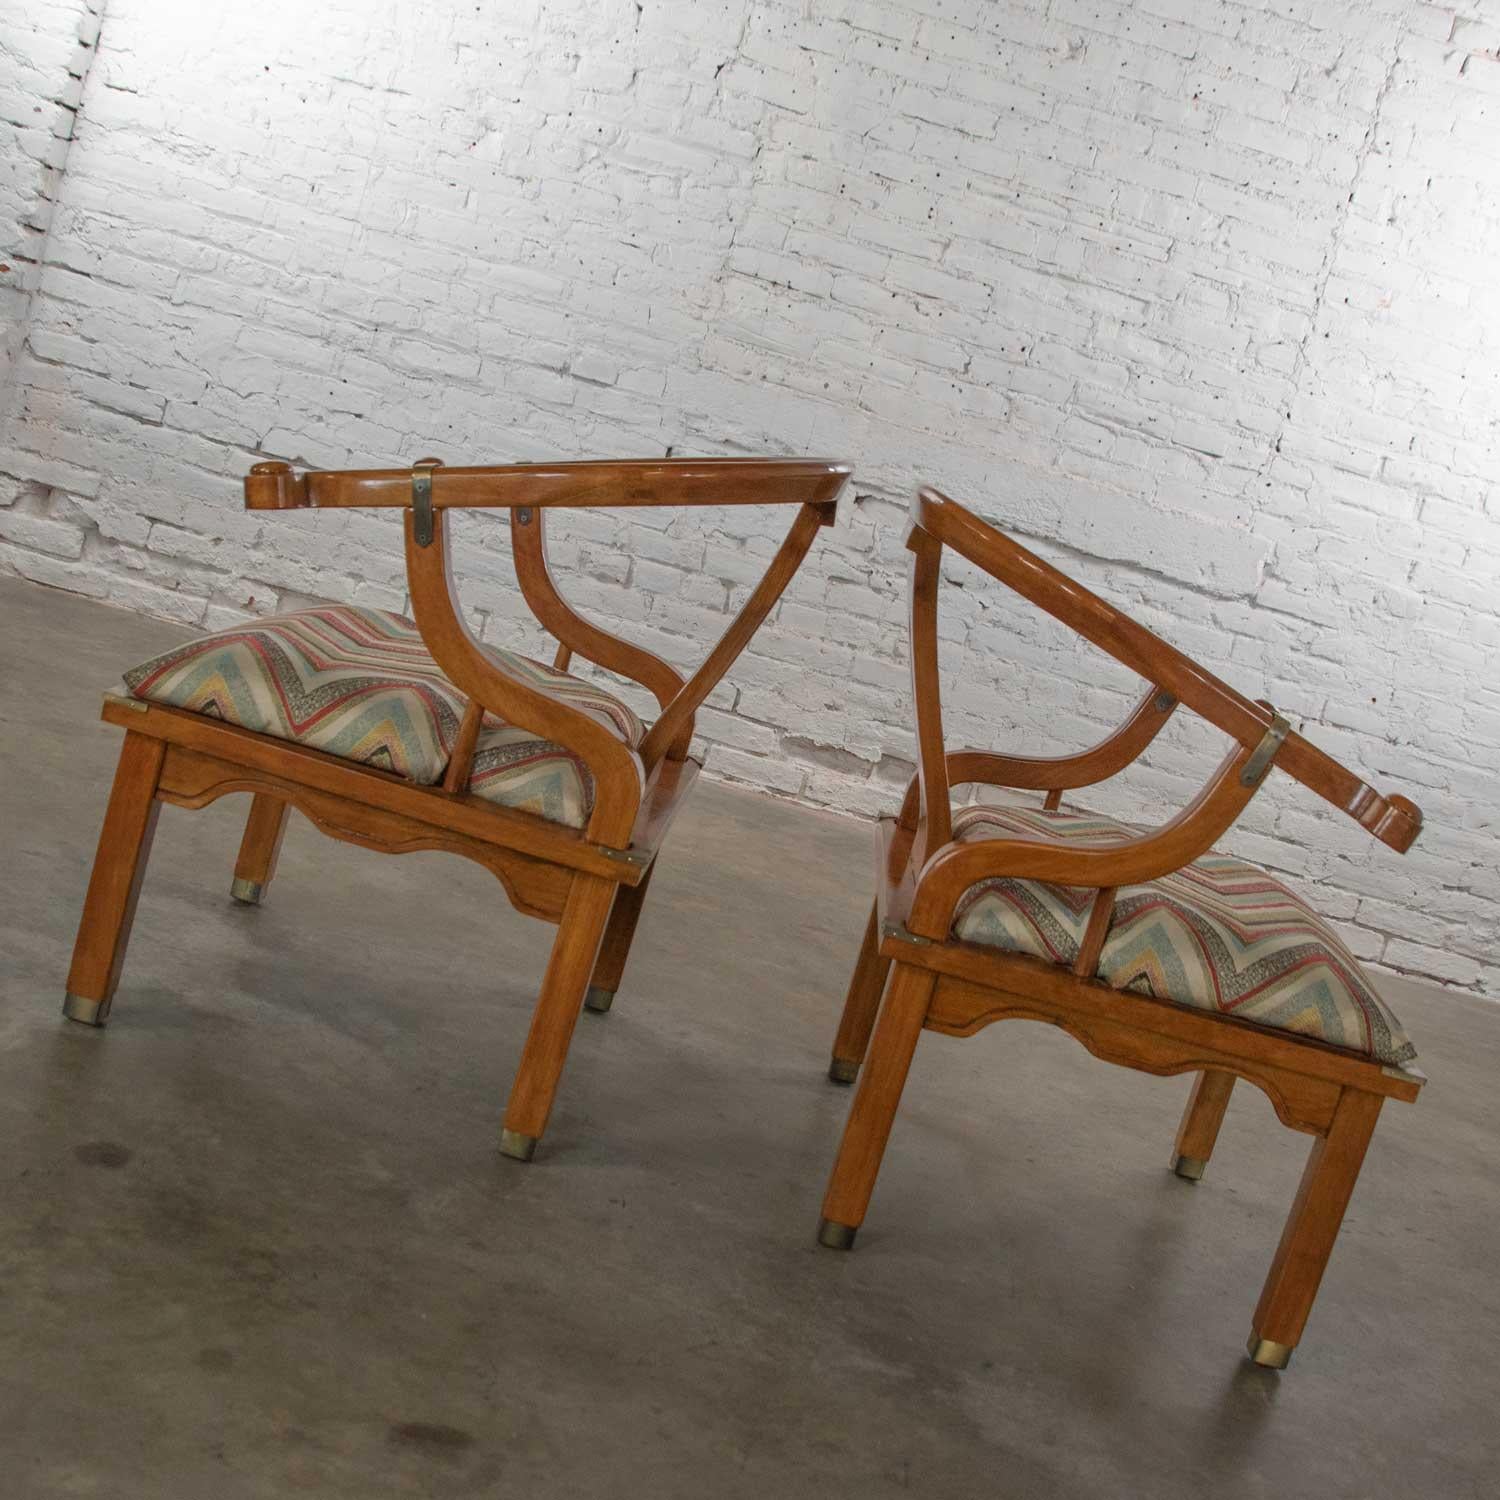 20th Century Chinoiserie Ming Style Pair of Yoke Back Lounge Chairs Attributed to Schnadig 